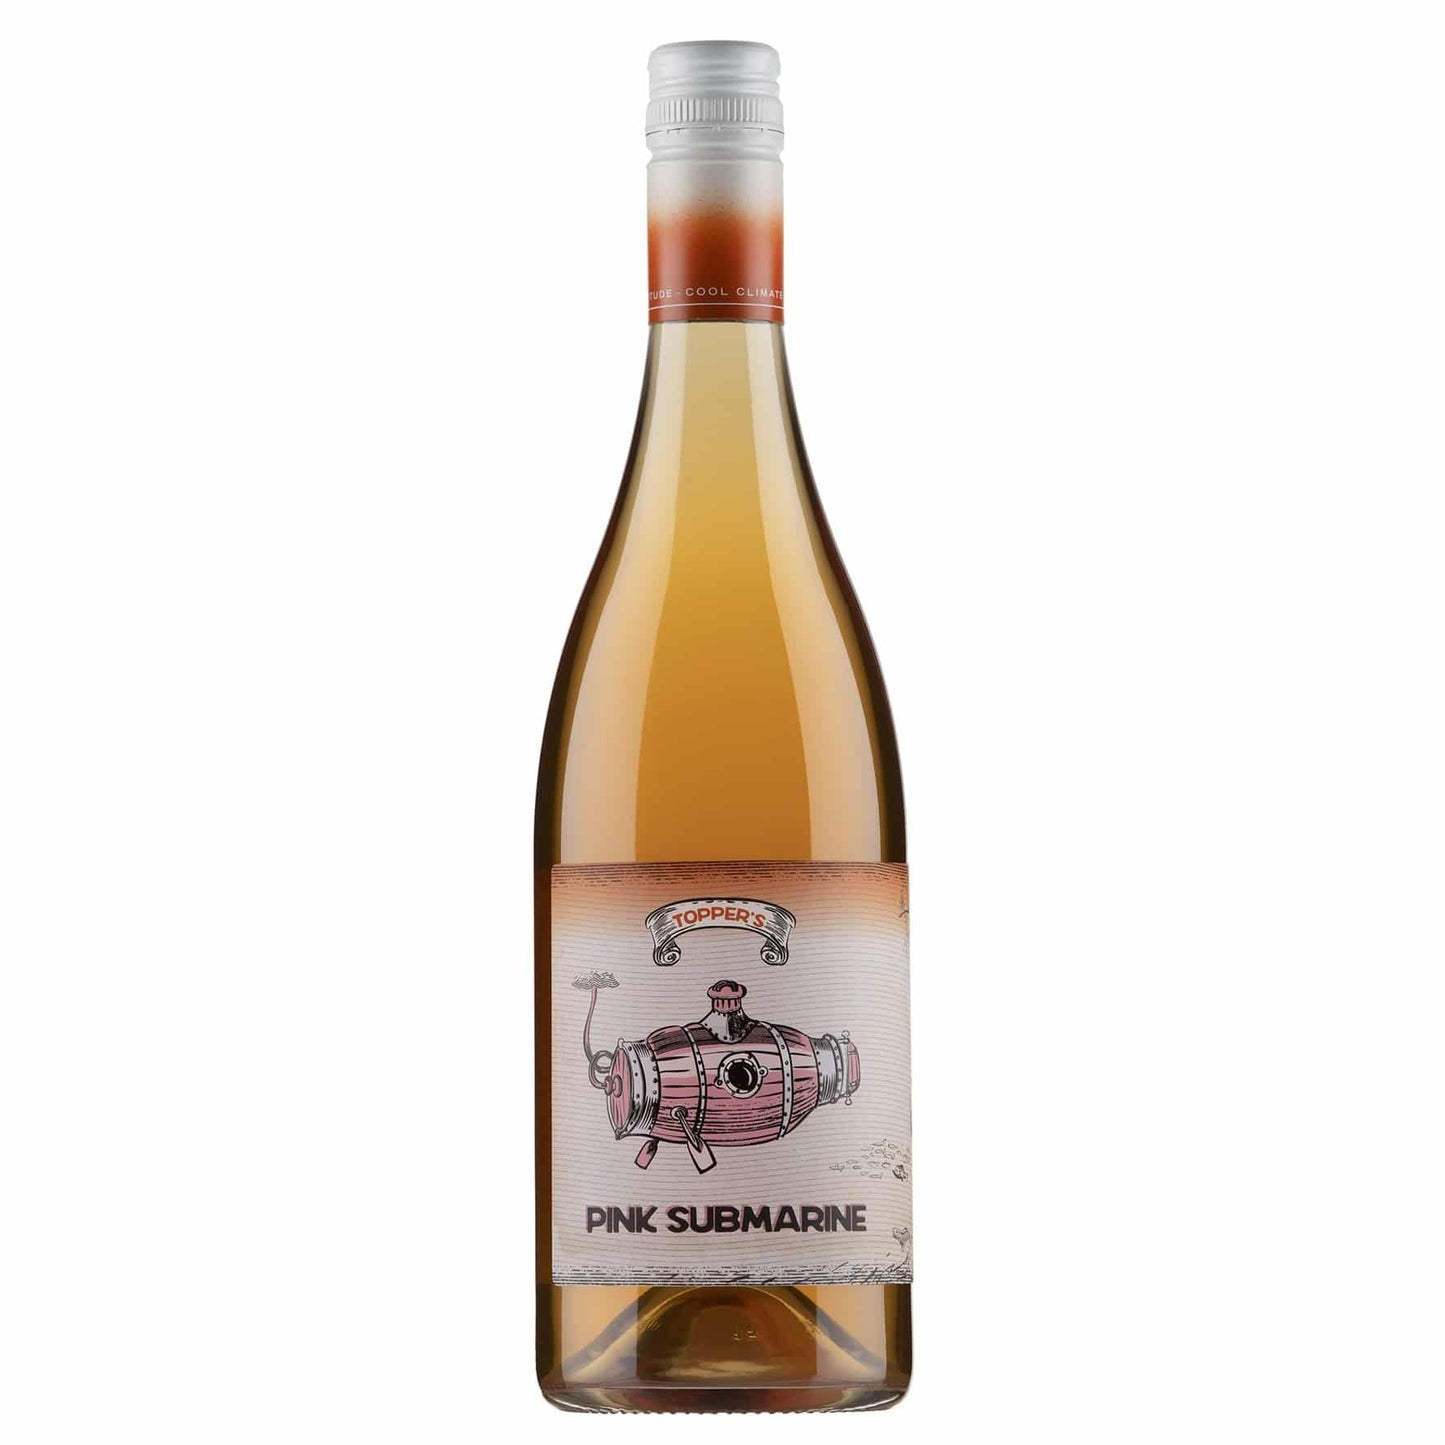 2021 Pink Submarine by Toppers Mountain Wines